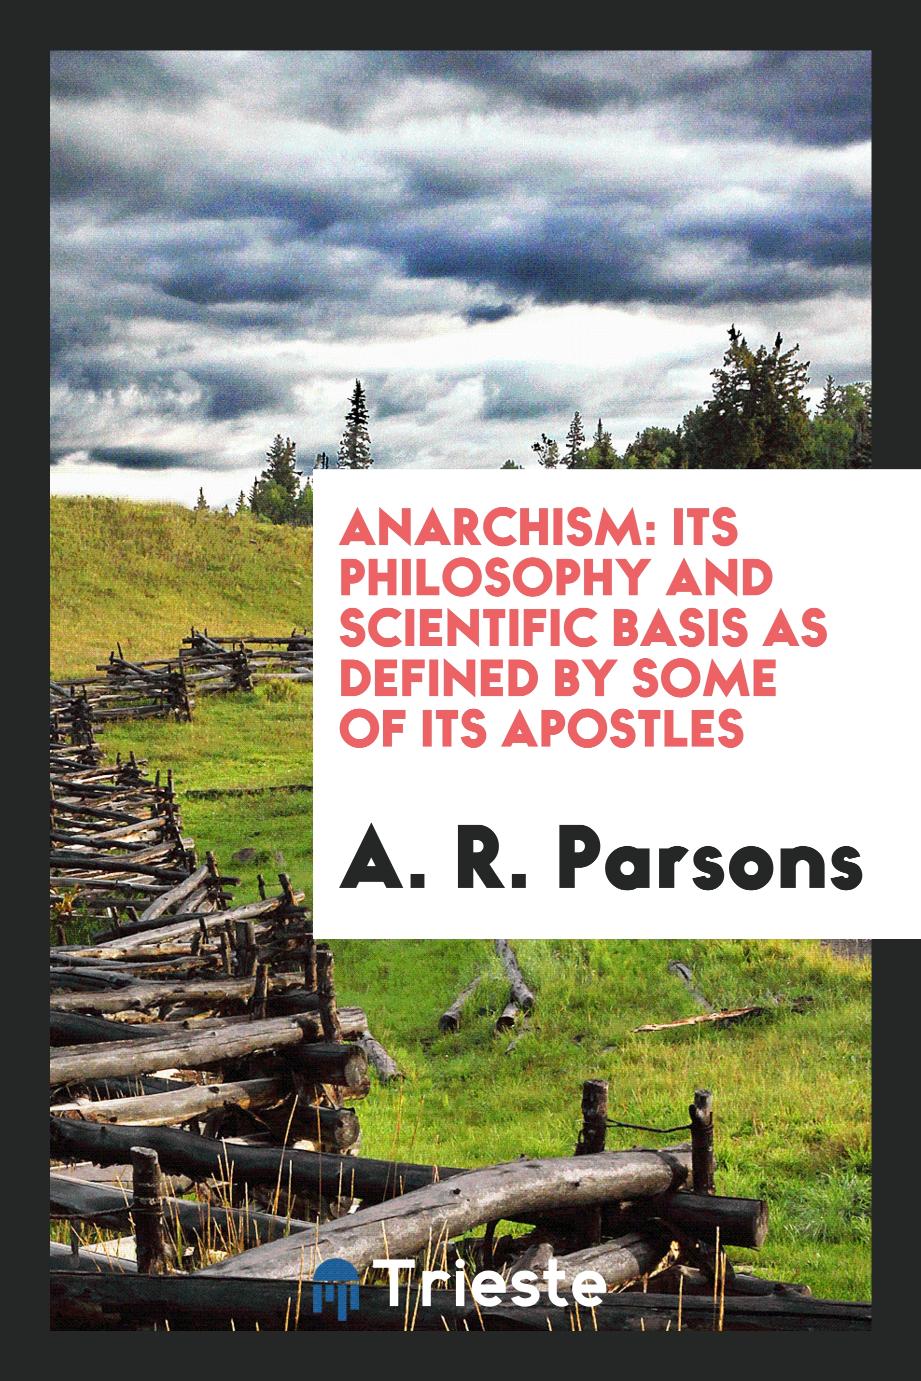 Anarchism: its philosophy and scientific basis as defined by some of its apostles